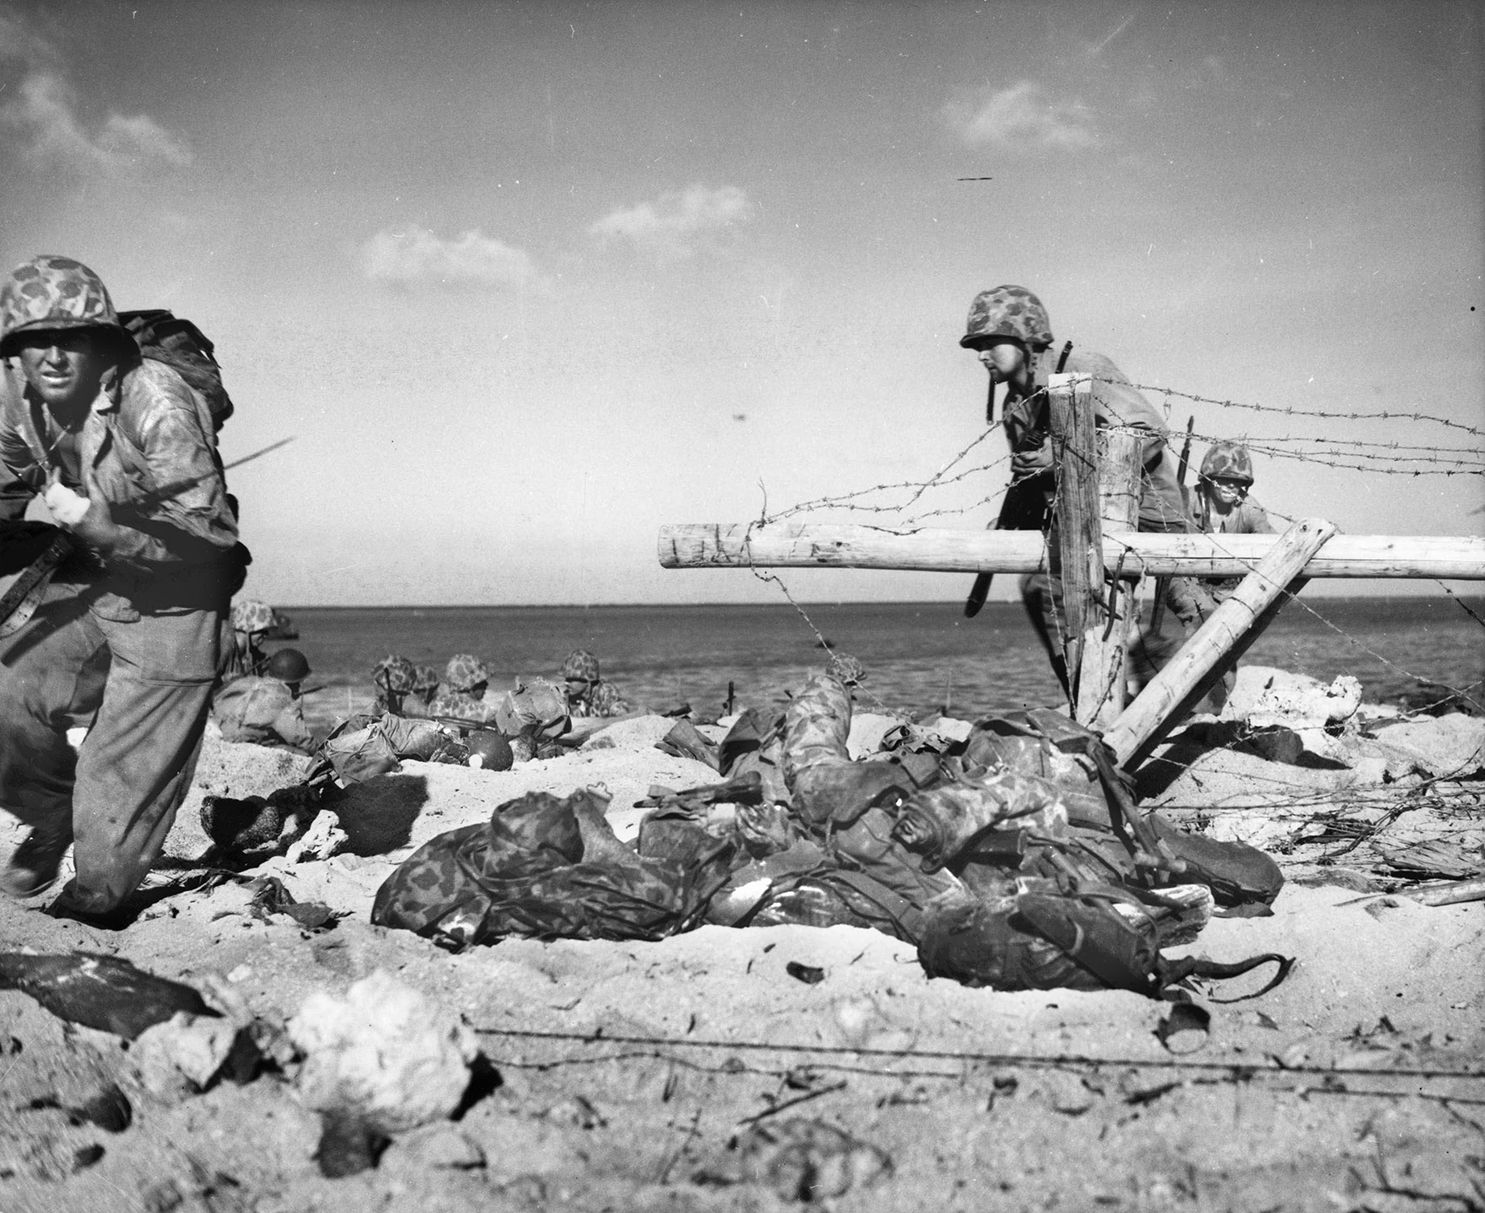 Marine with fixed bayonet and a bandage on his wounded hand, left, leads others around a barbed wire entanglement on the beach at Tarawa.